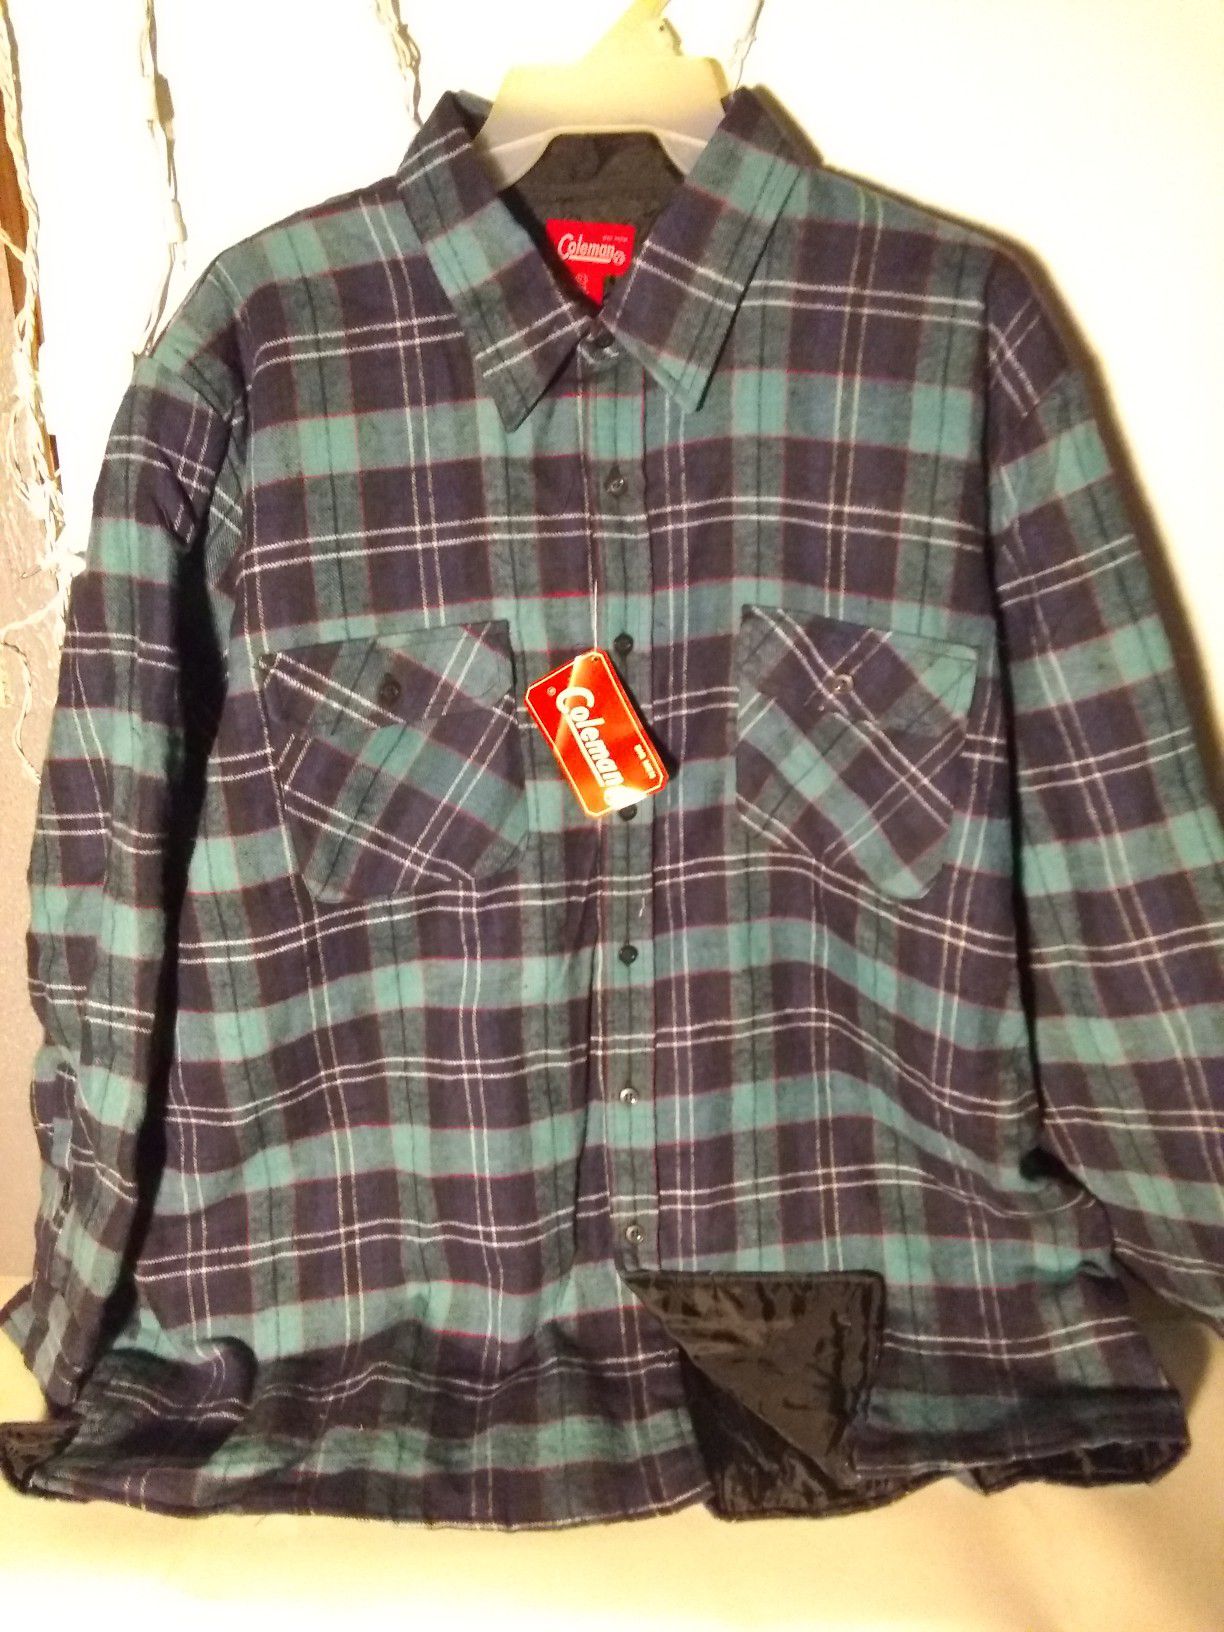 Coleman flannels With nylon quilted inside Red 3XL Blu 2XL Tan 2XL Buffer Zone green flannel 3XL tall